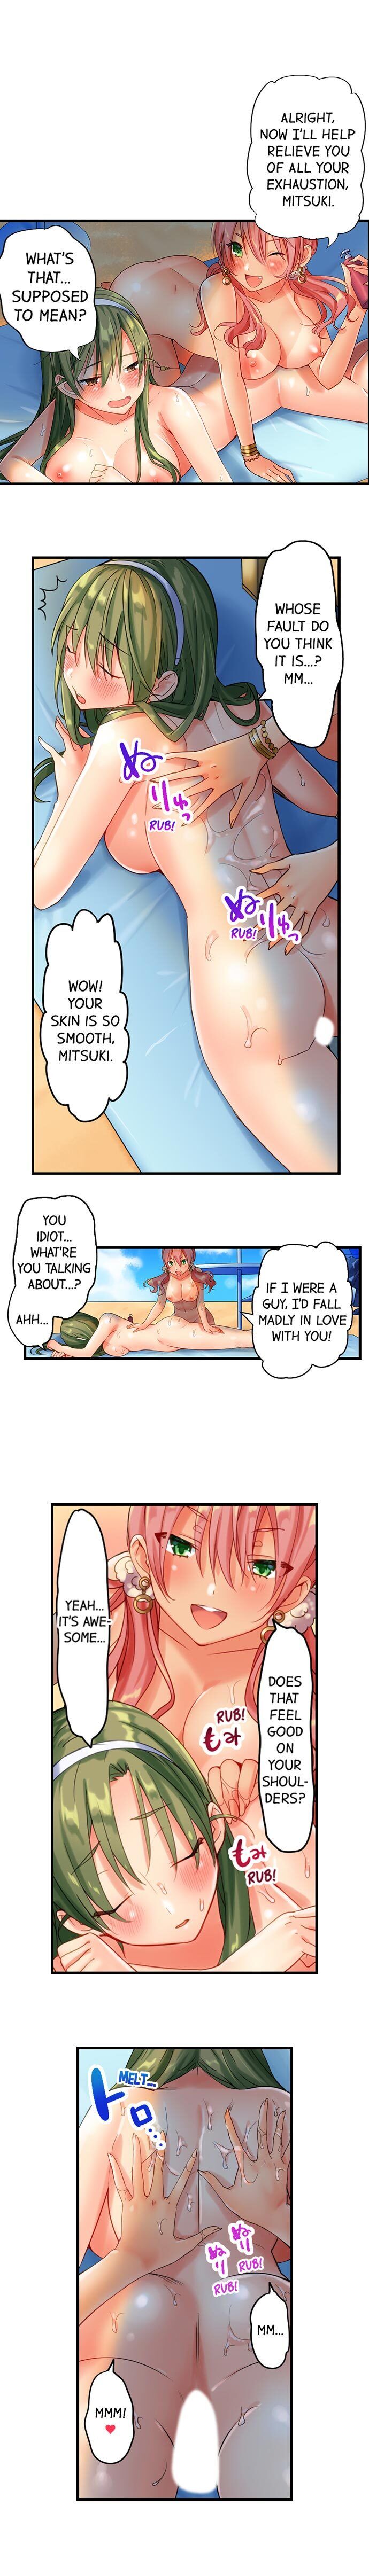 A Chaste Girl’s Climax at a Nudist Beach - Chapter 4 Page 9